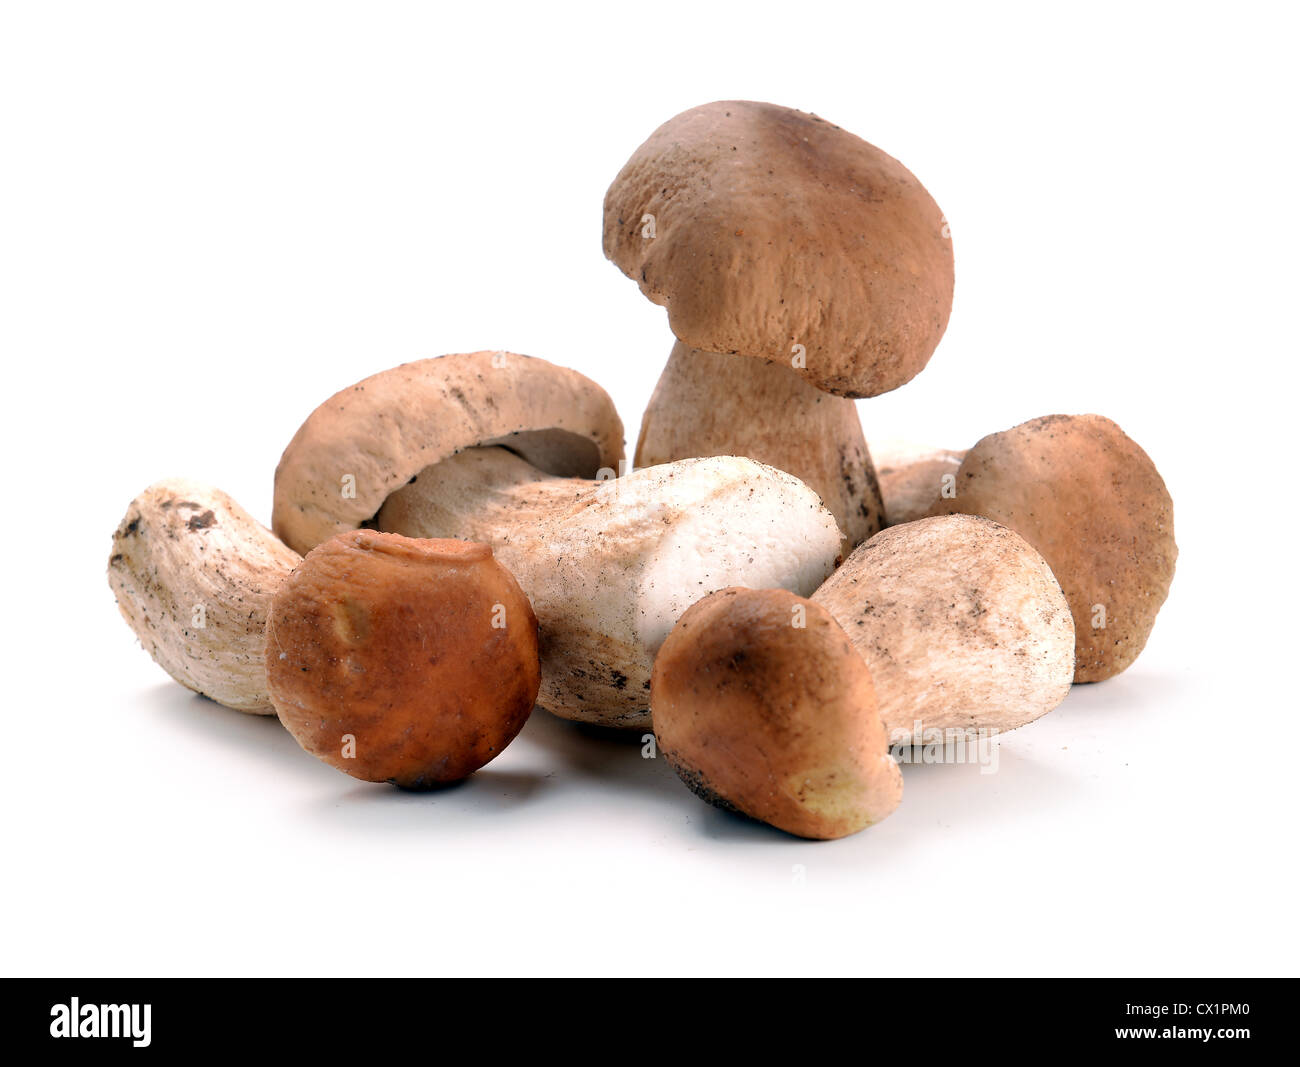 ceps mushrooms on a white background Stock Photo